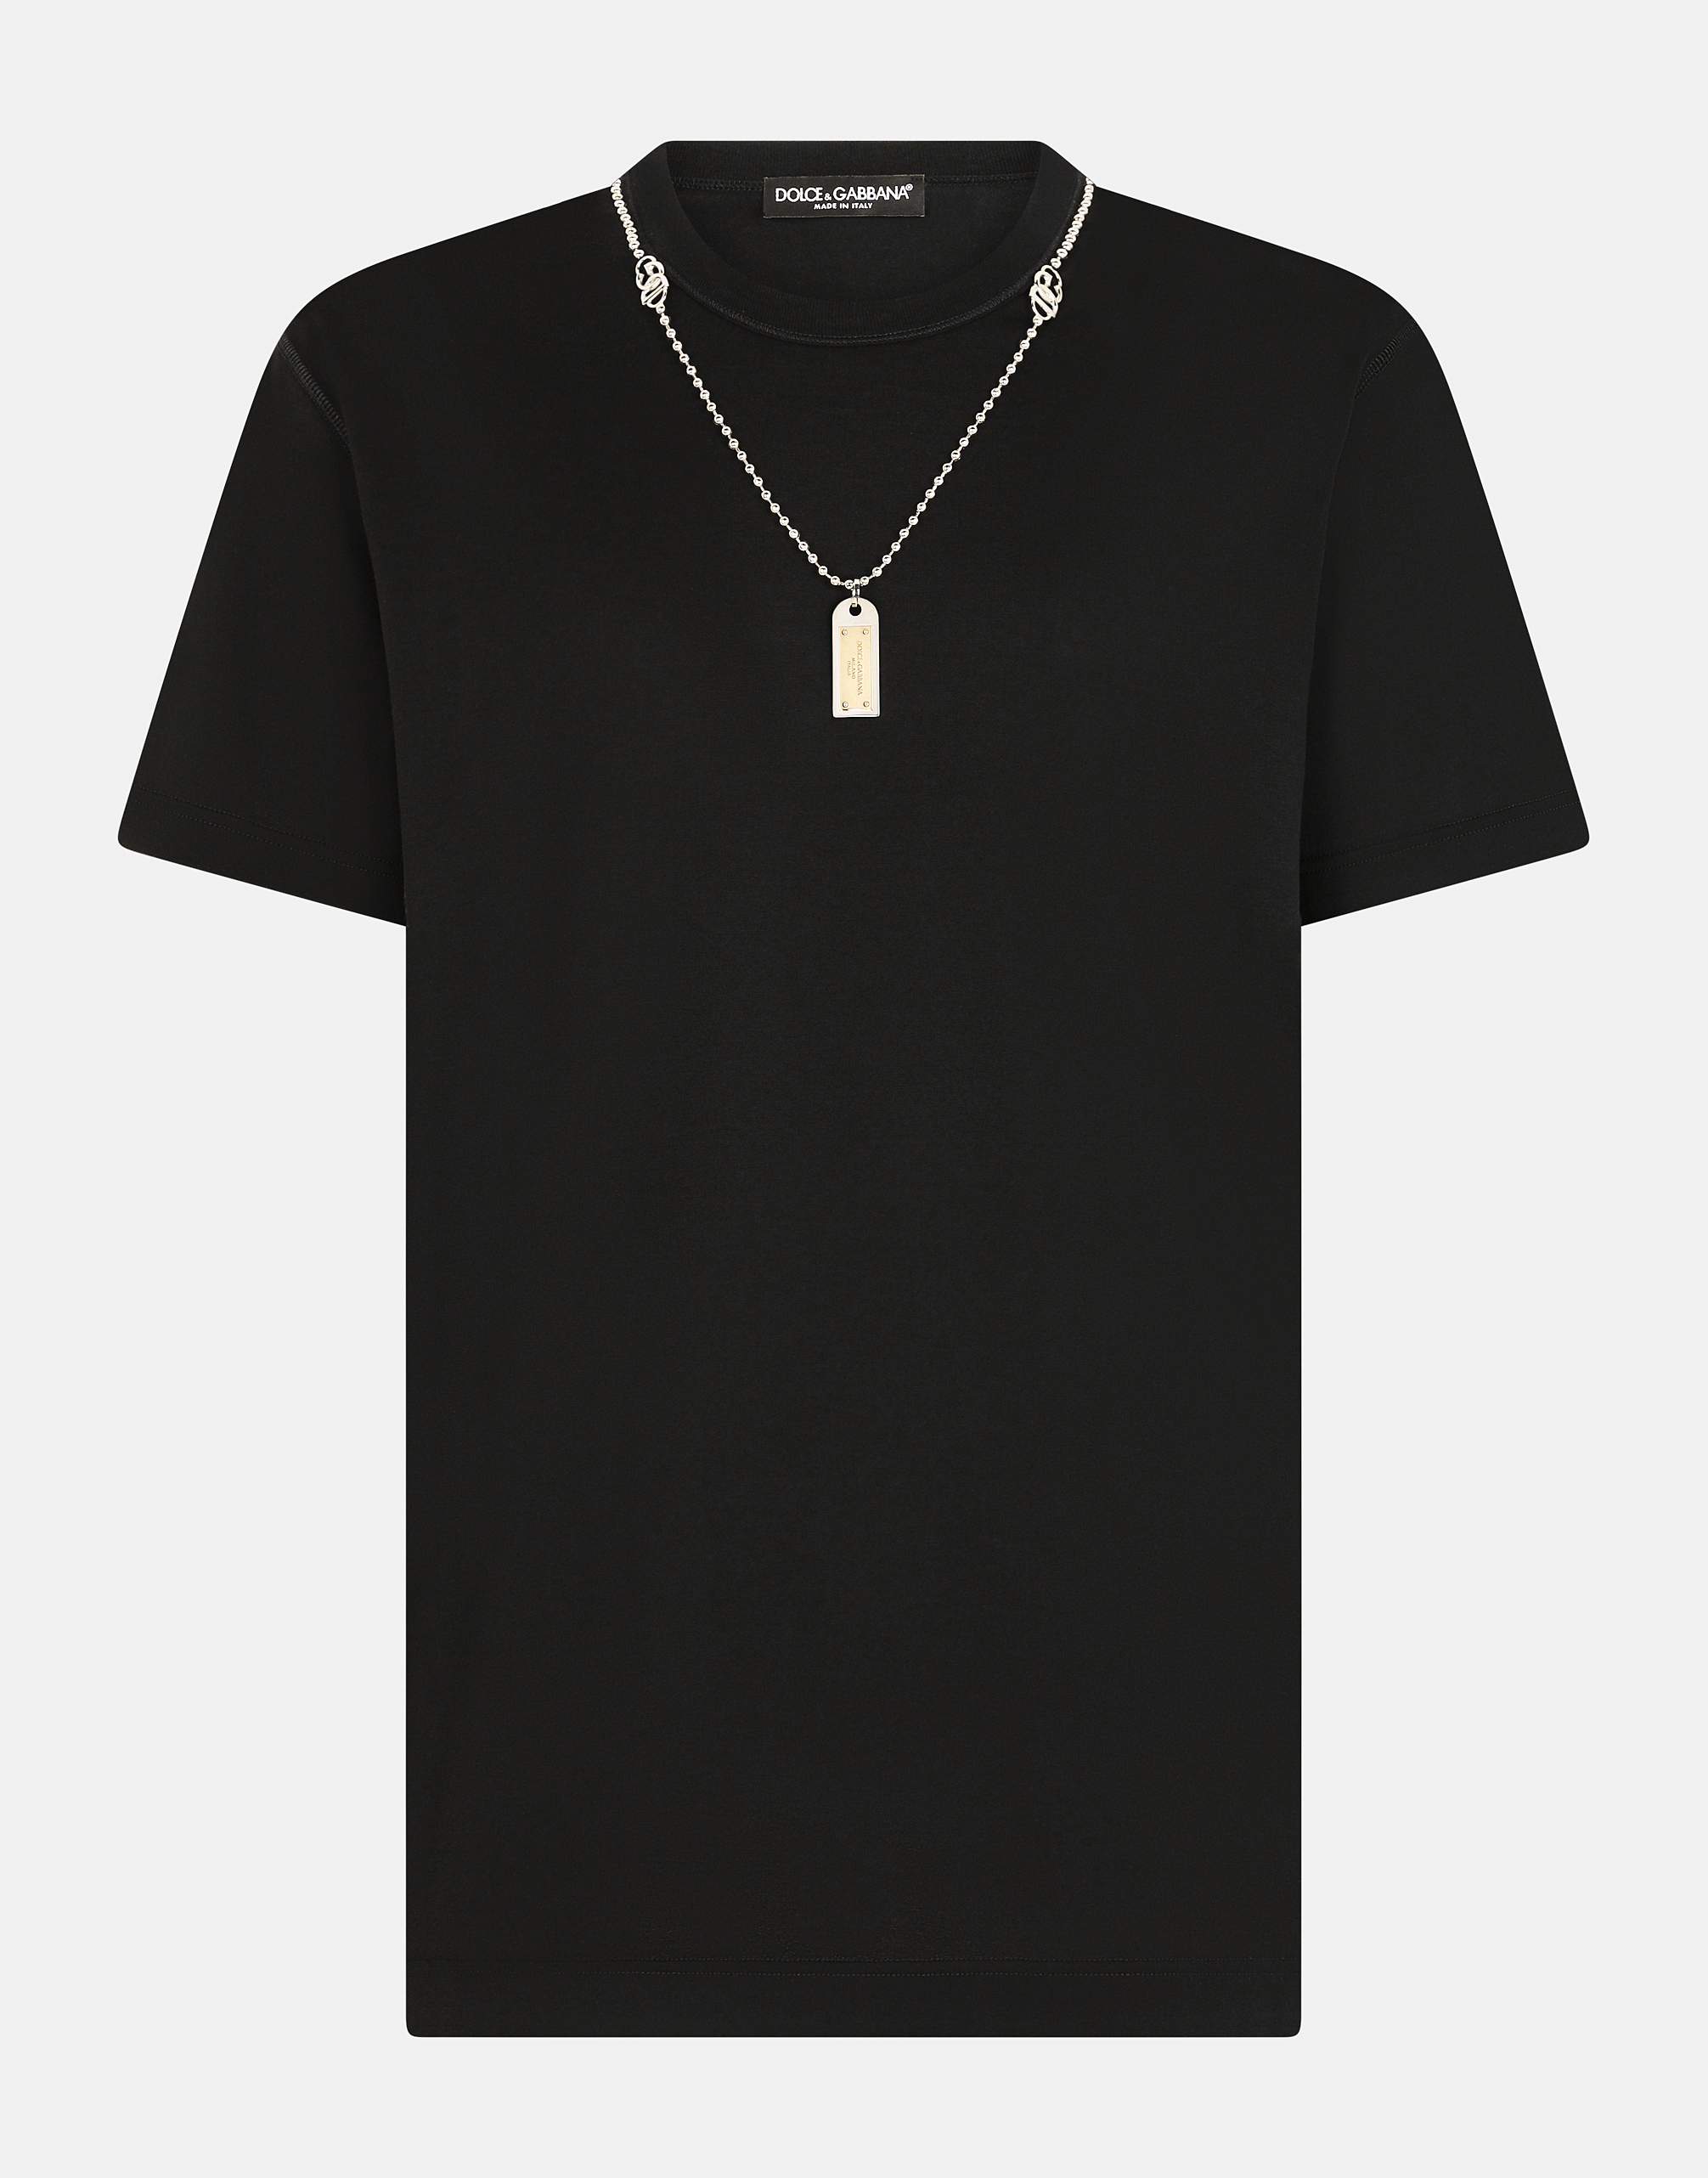 Cotton T-shirt with necklace in Black